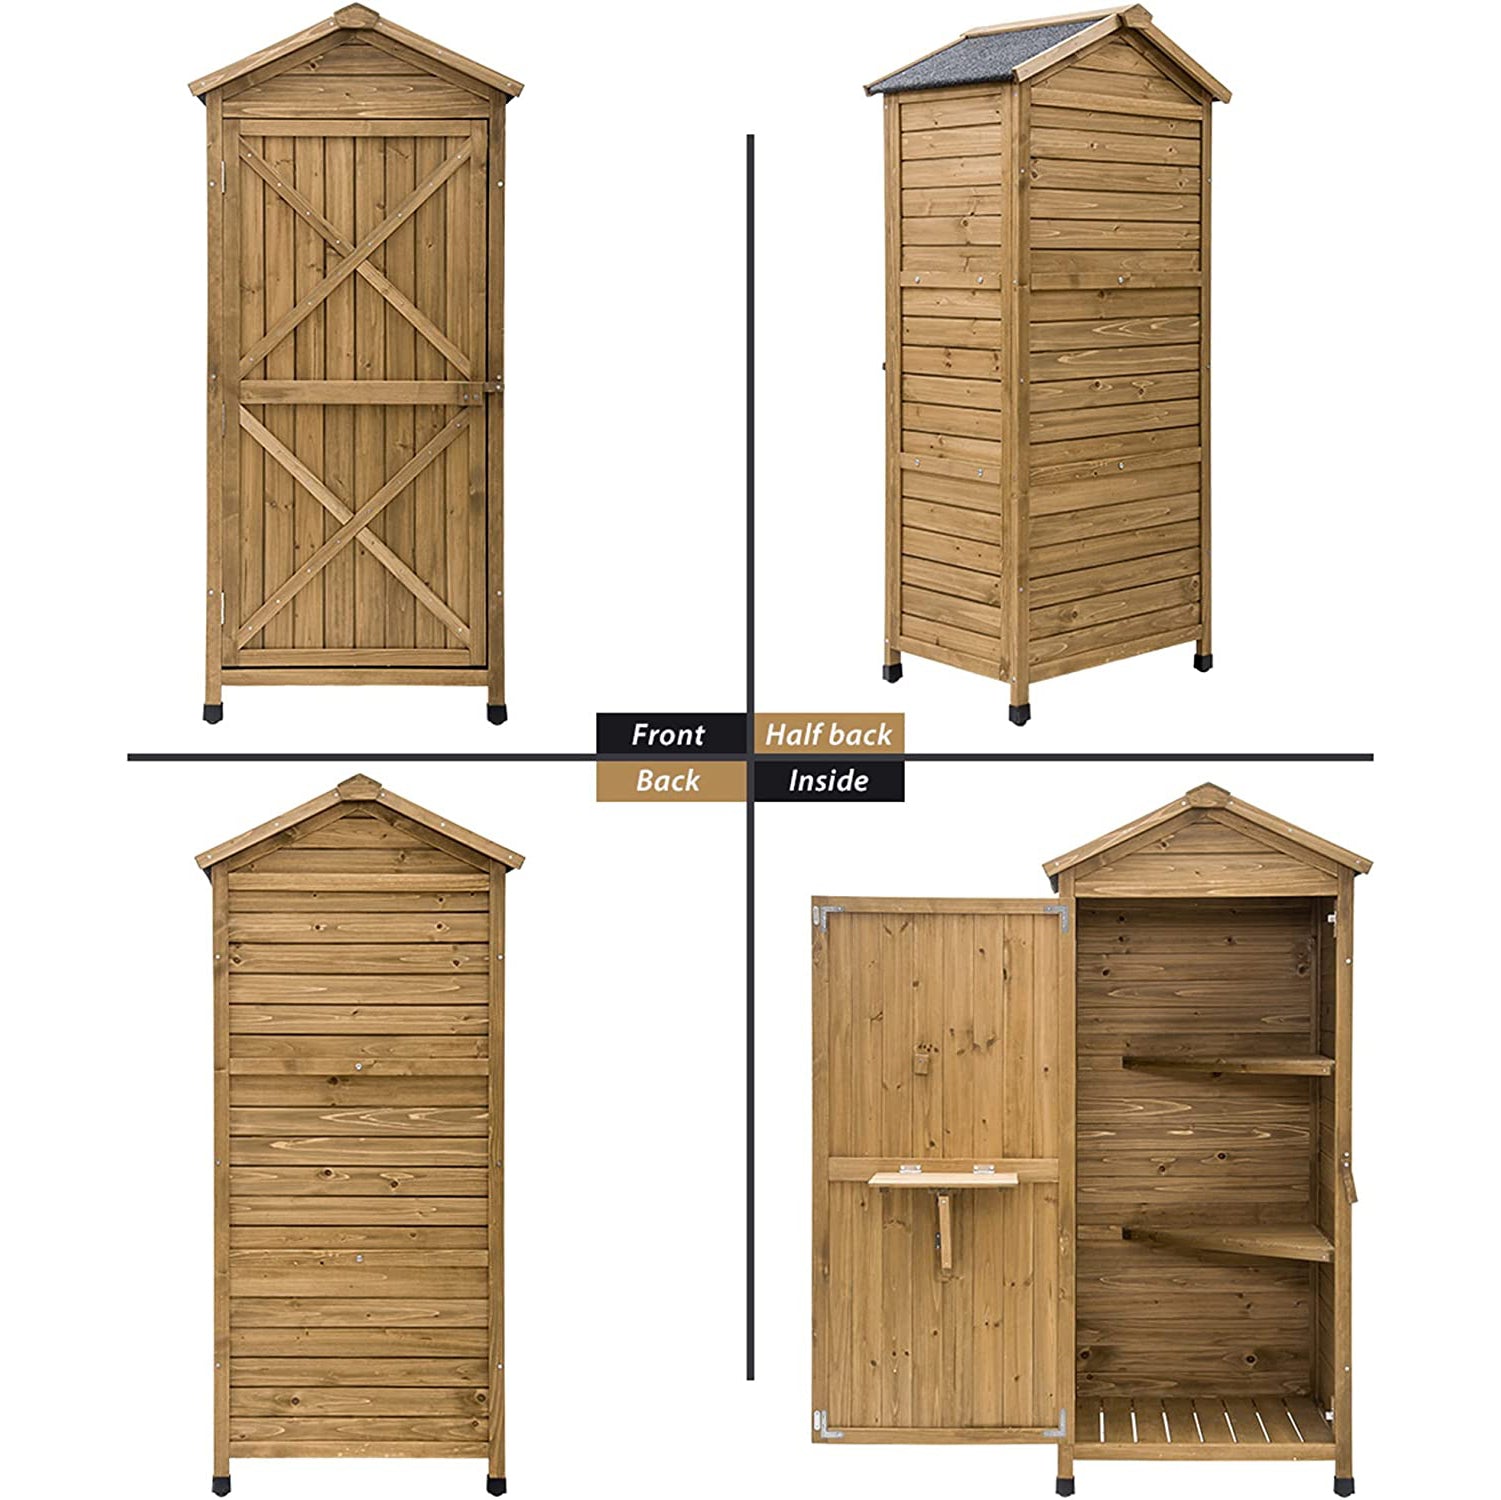 Outdoor Wooden Storage Sheds Fir Wood Lockers with Workstation